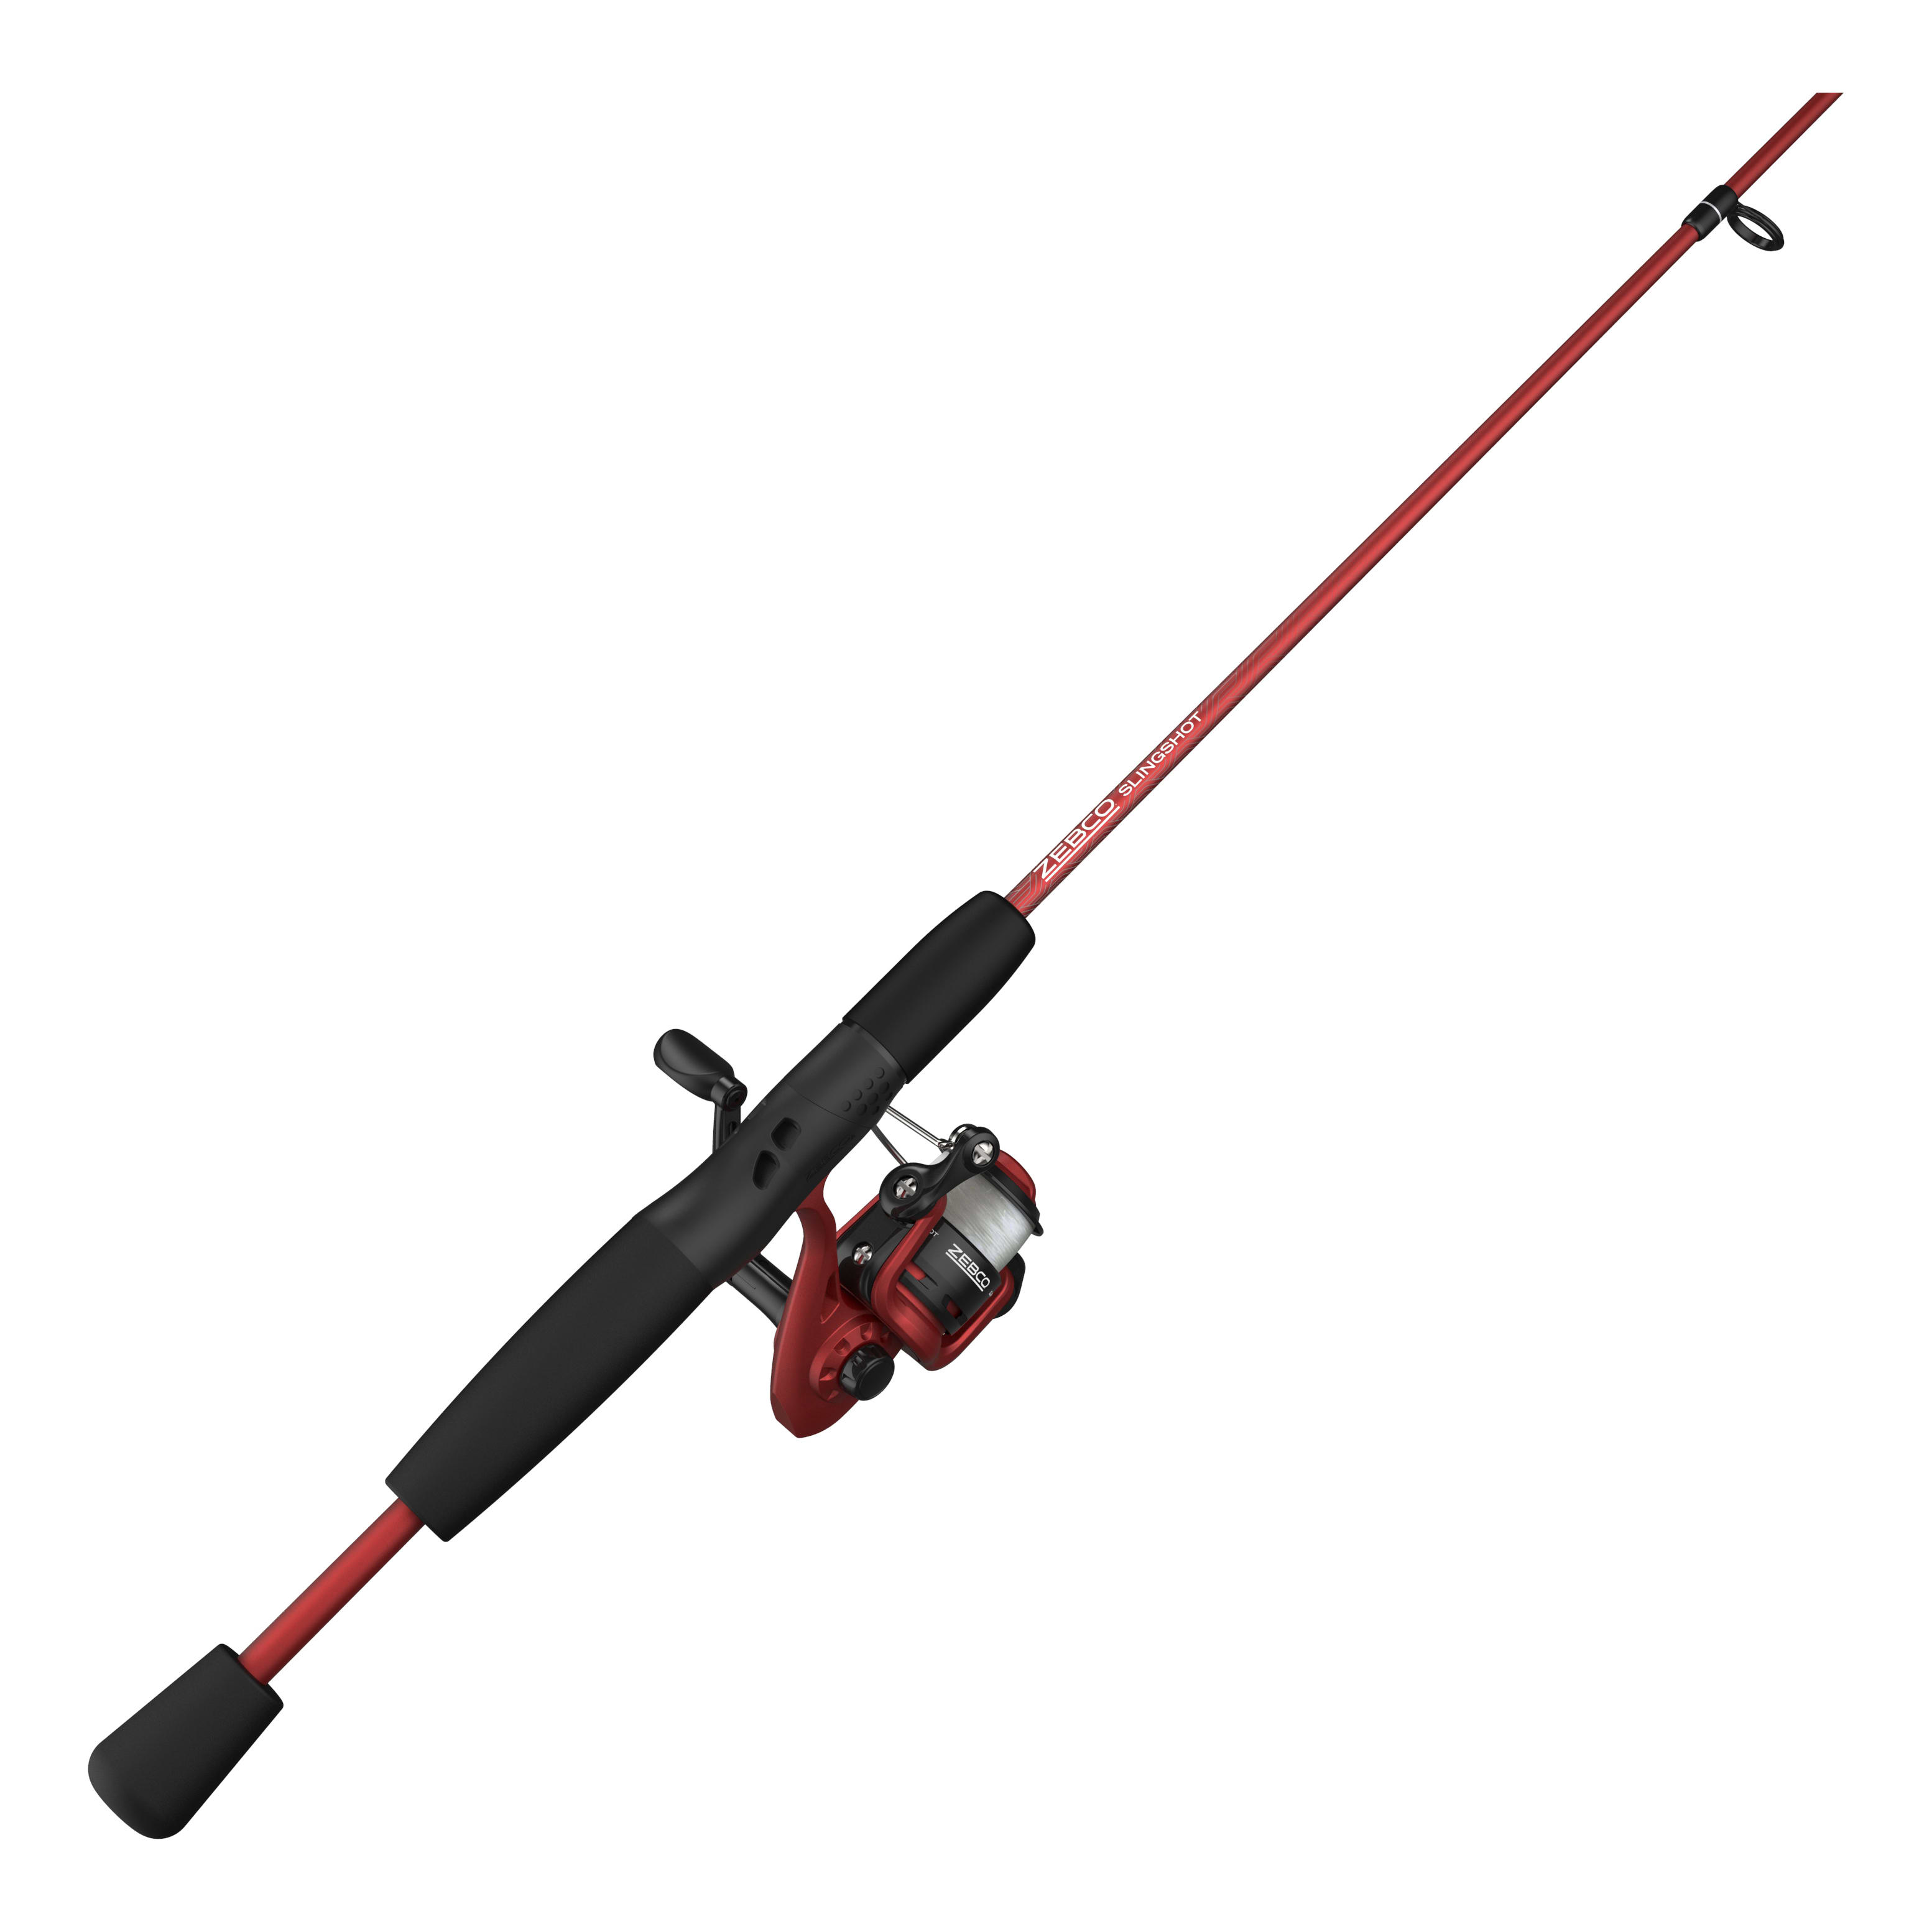 SOUTH BEND MR. BIG FISH FISHING ROD AND ZEBCO QUANTUM SR2 SPINNING